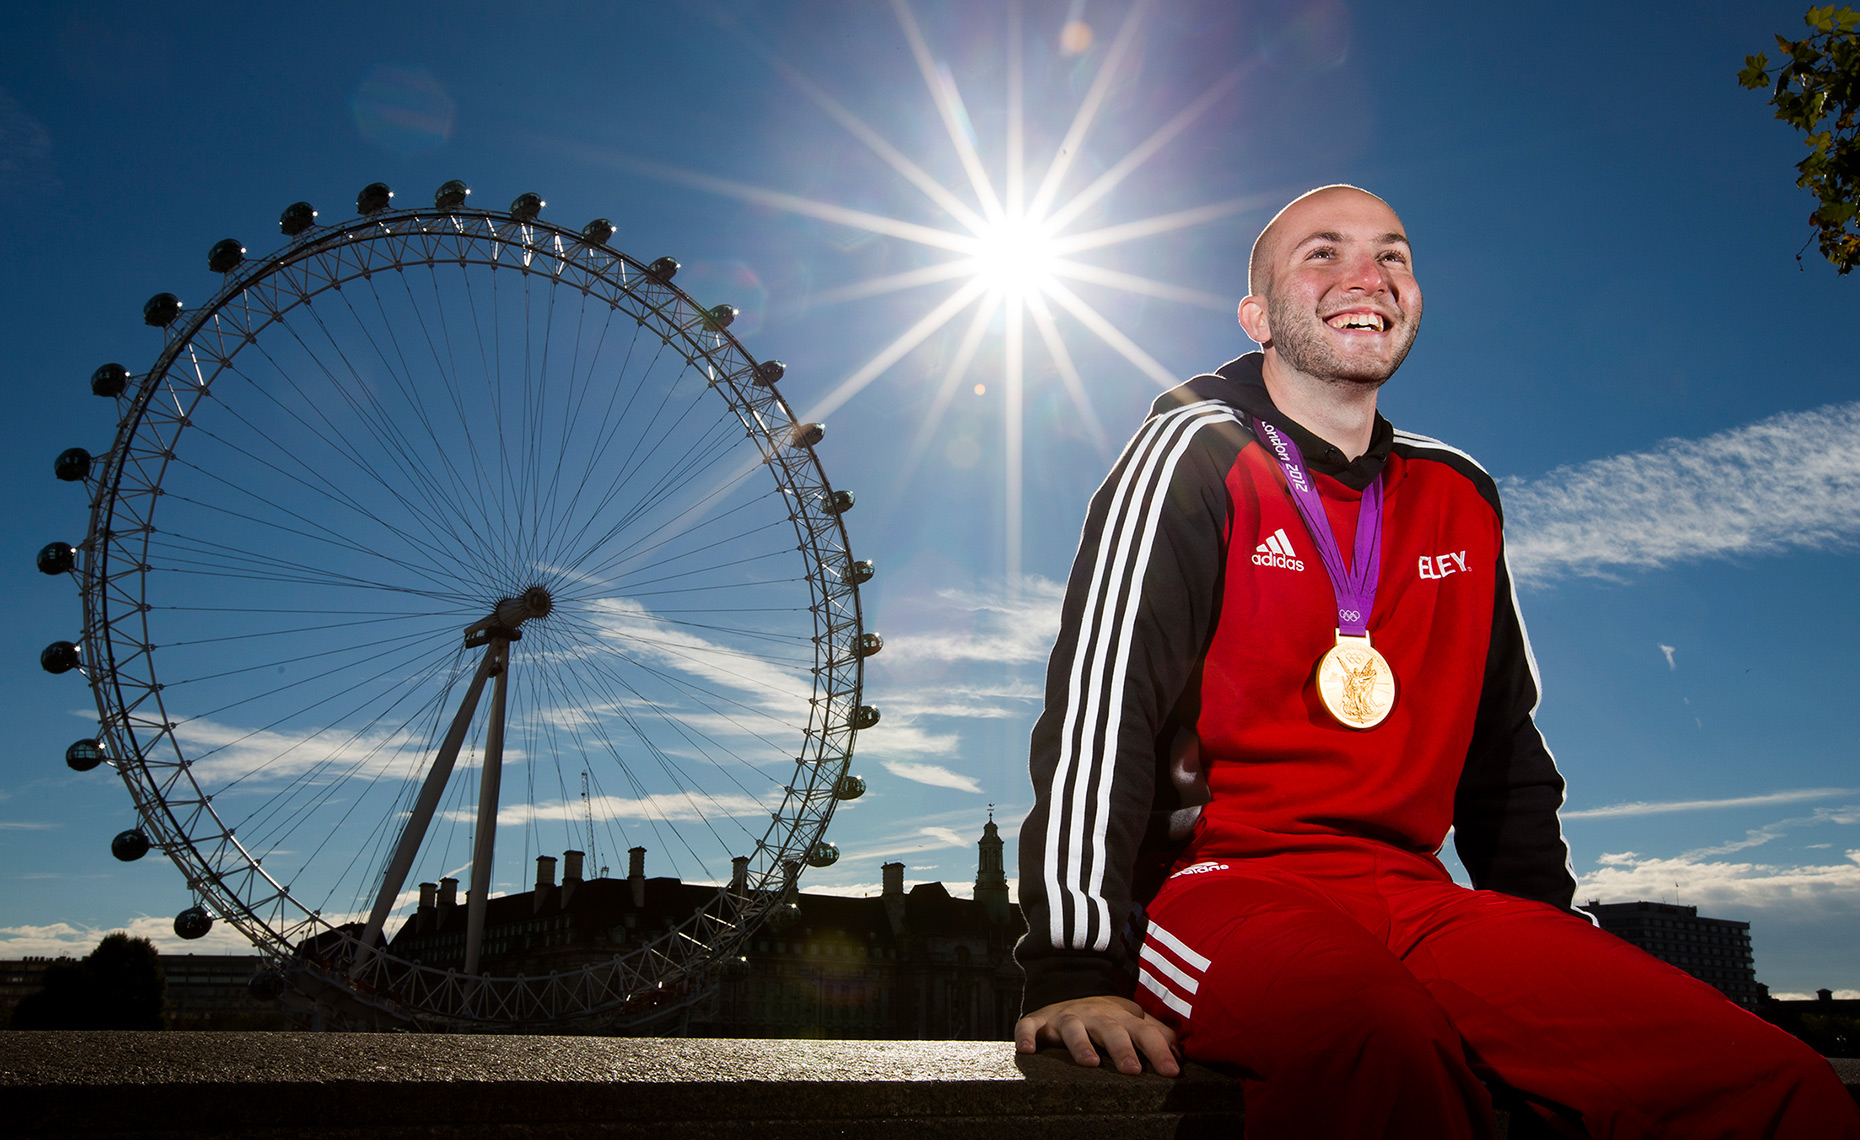 Advertising campaign portrait of Olympics Gold Medallist shooter Nicco Campriani